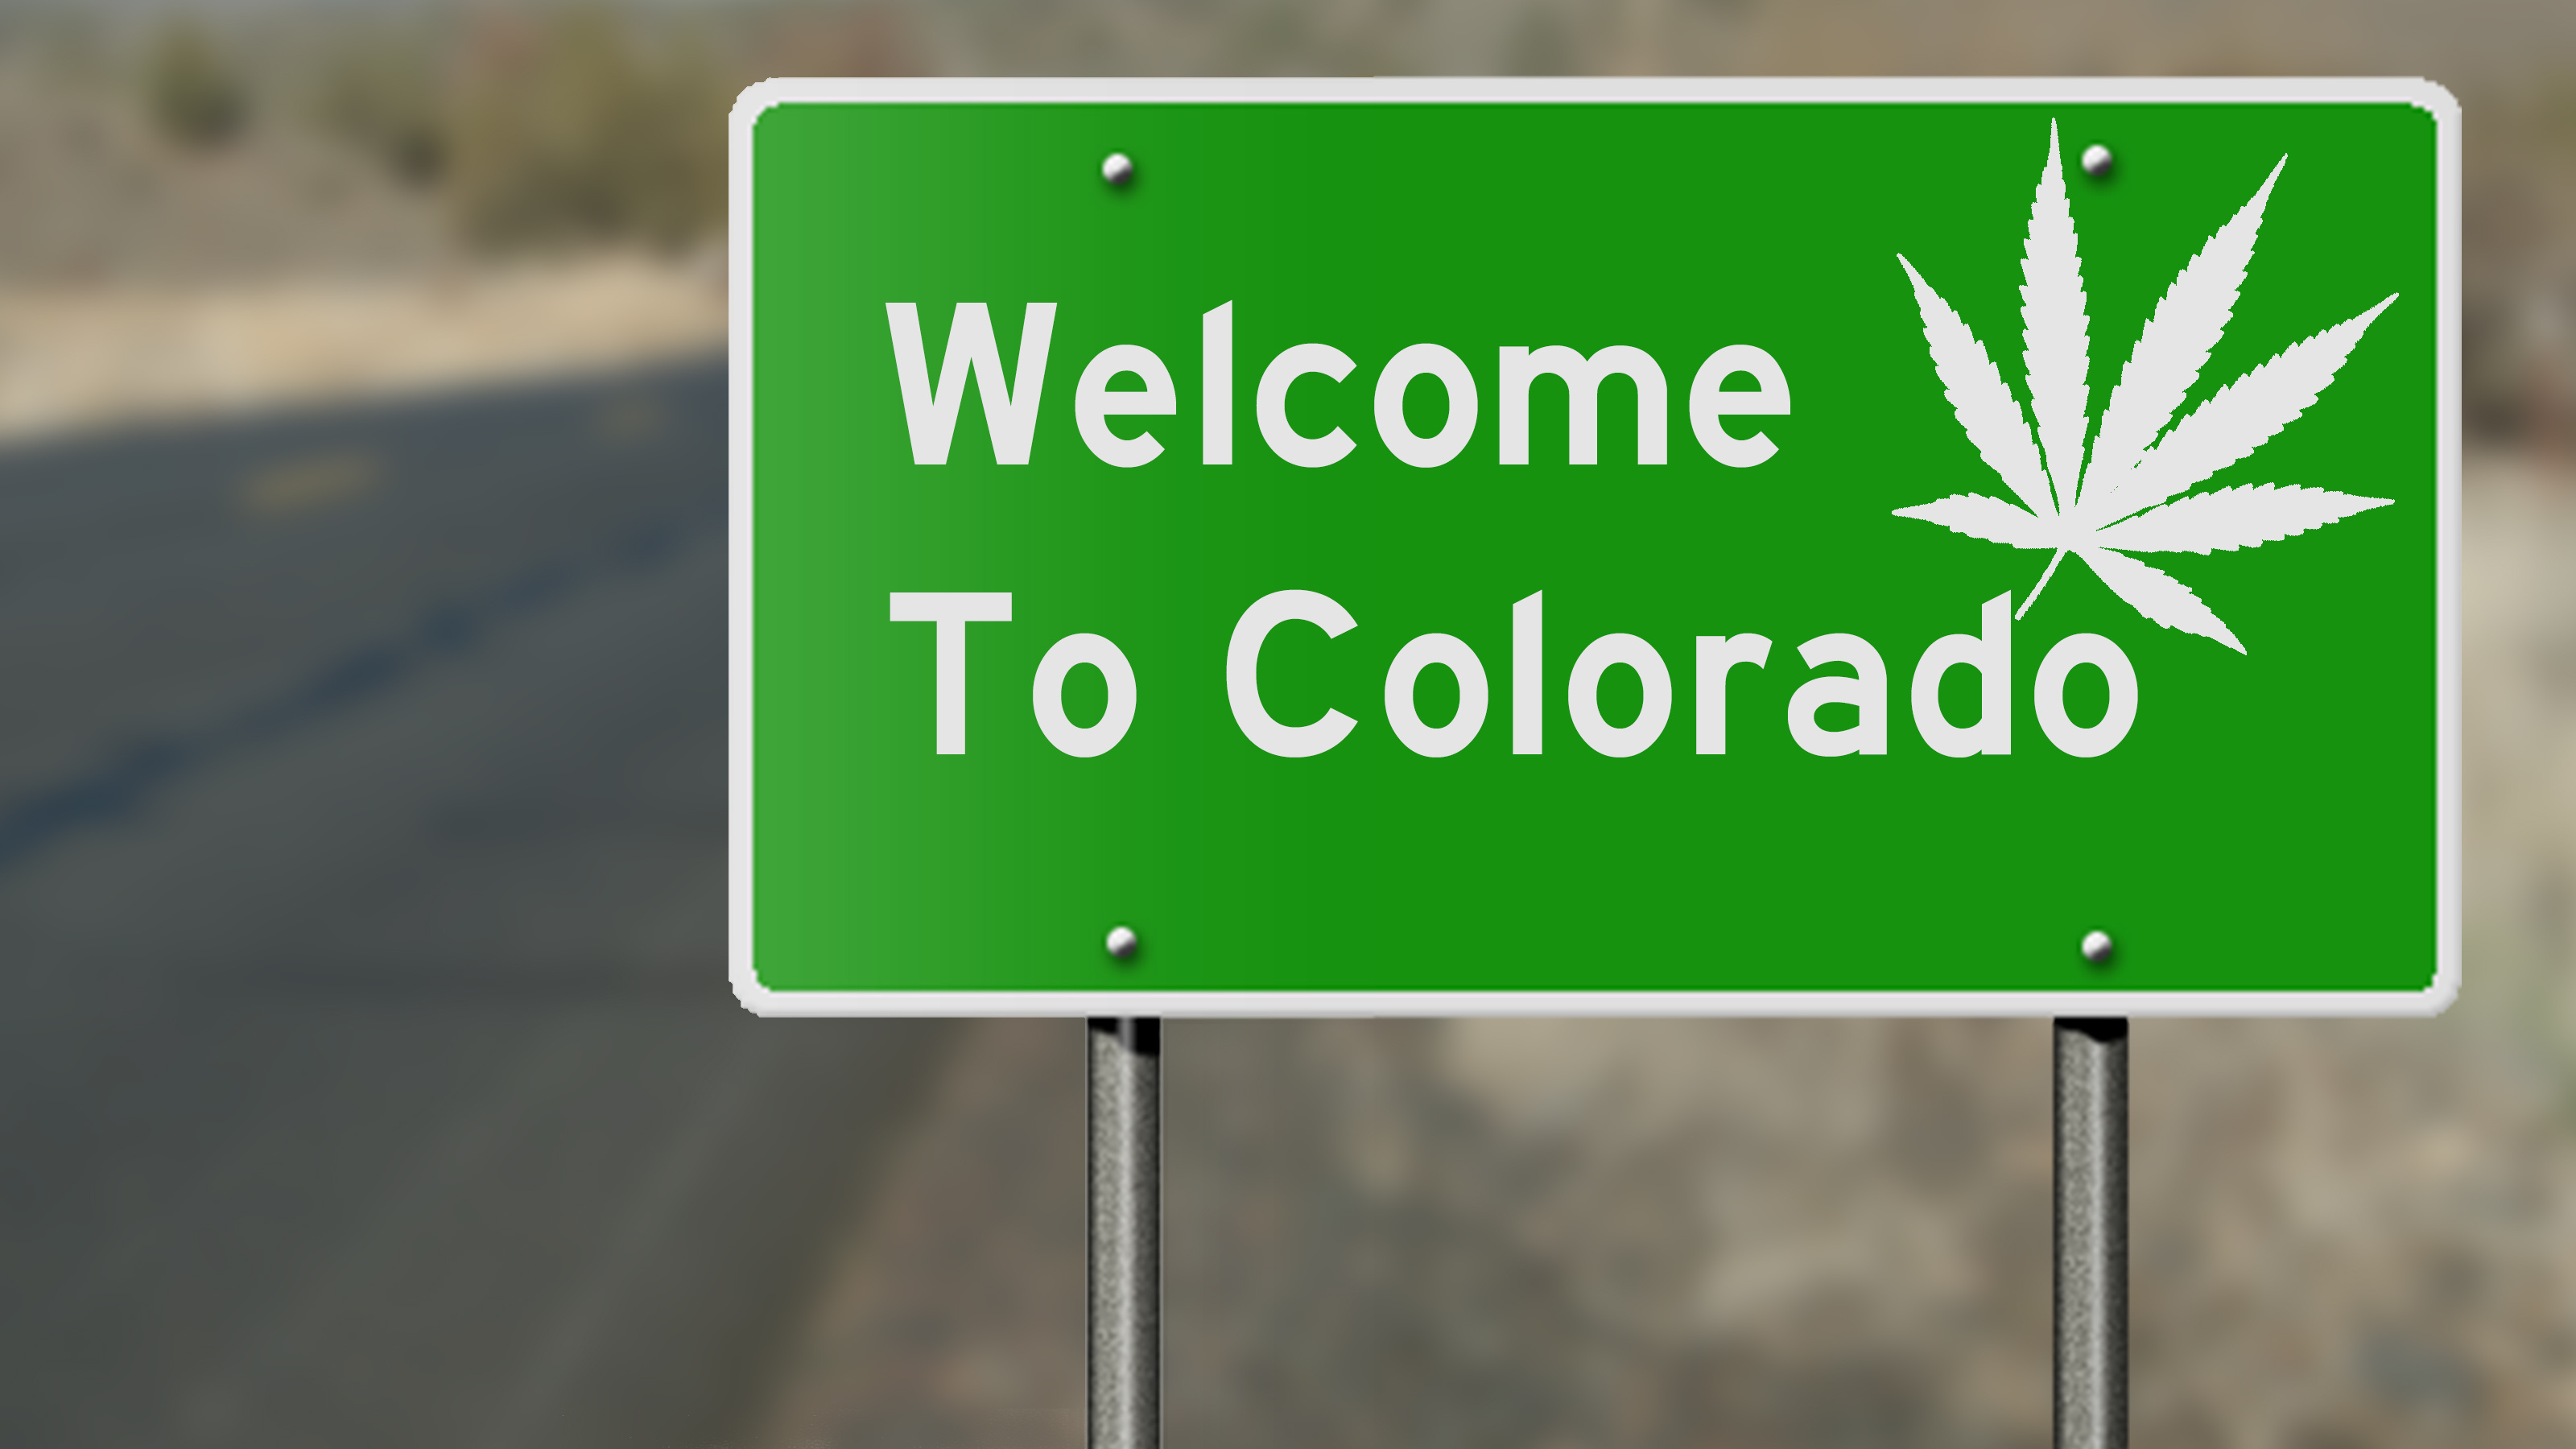 Welcome to Colorado highway sign with marijuana leaf